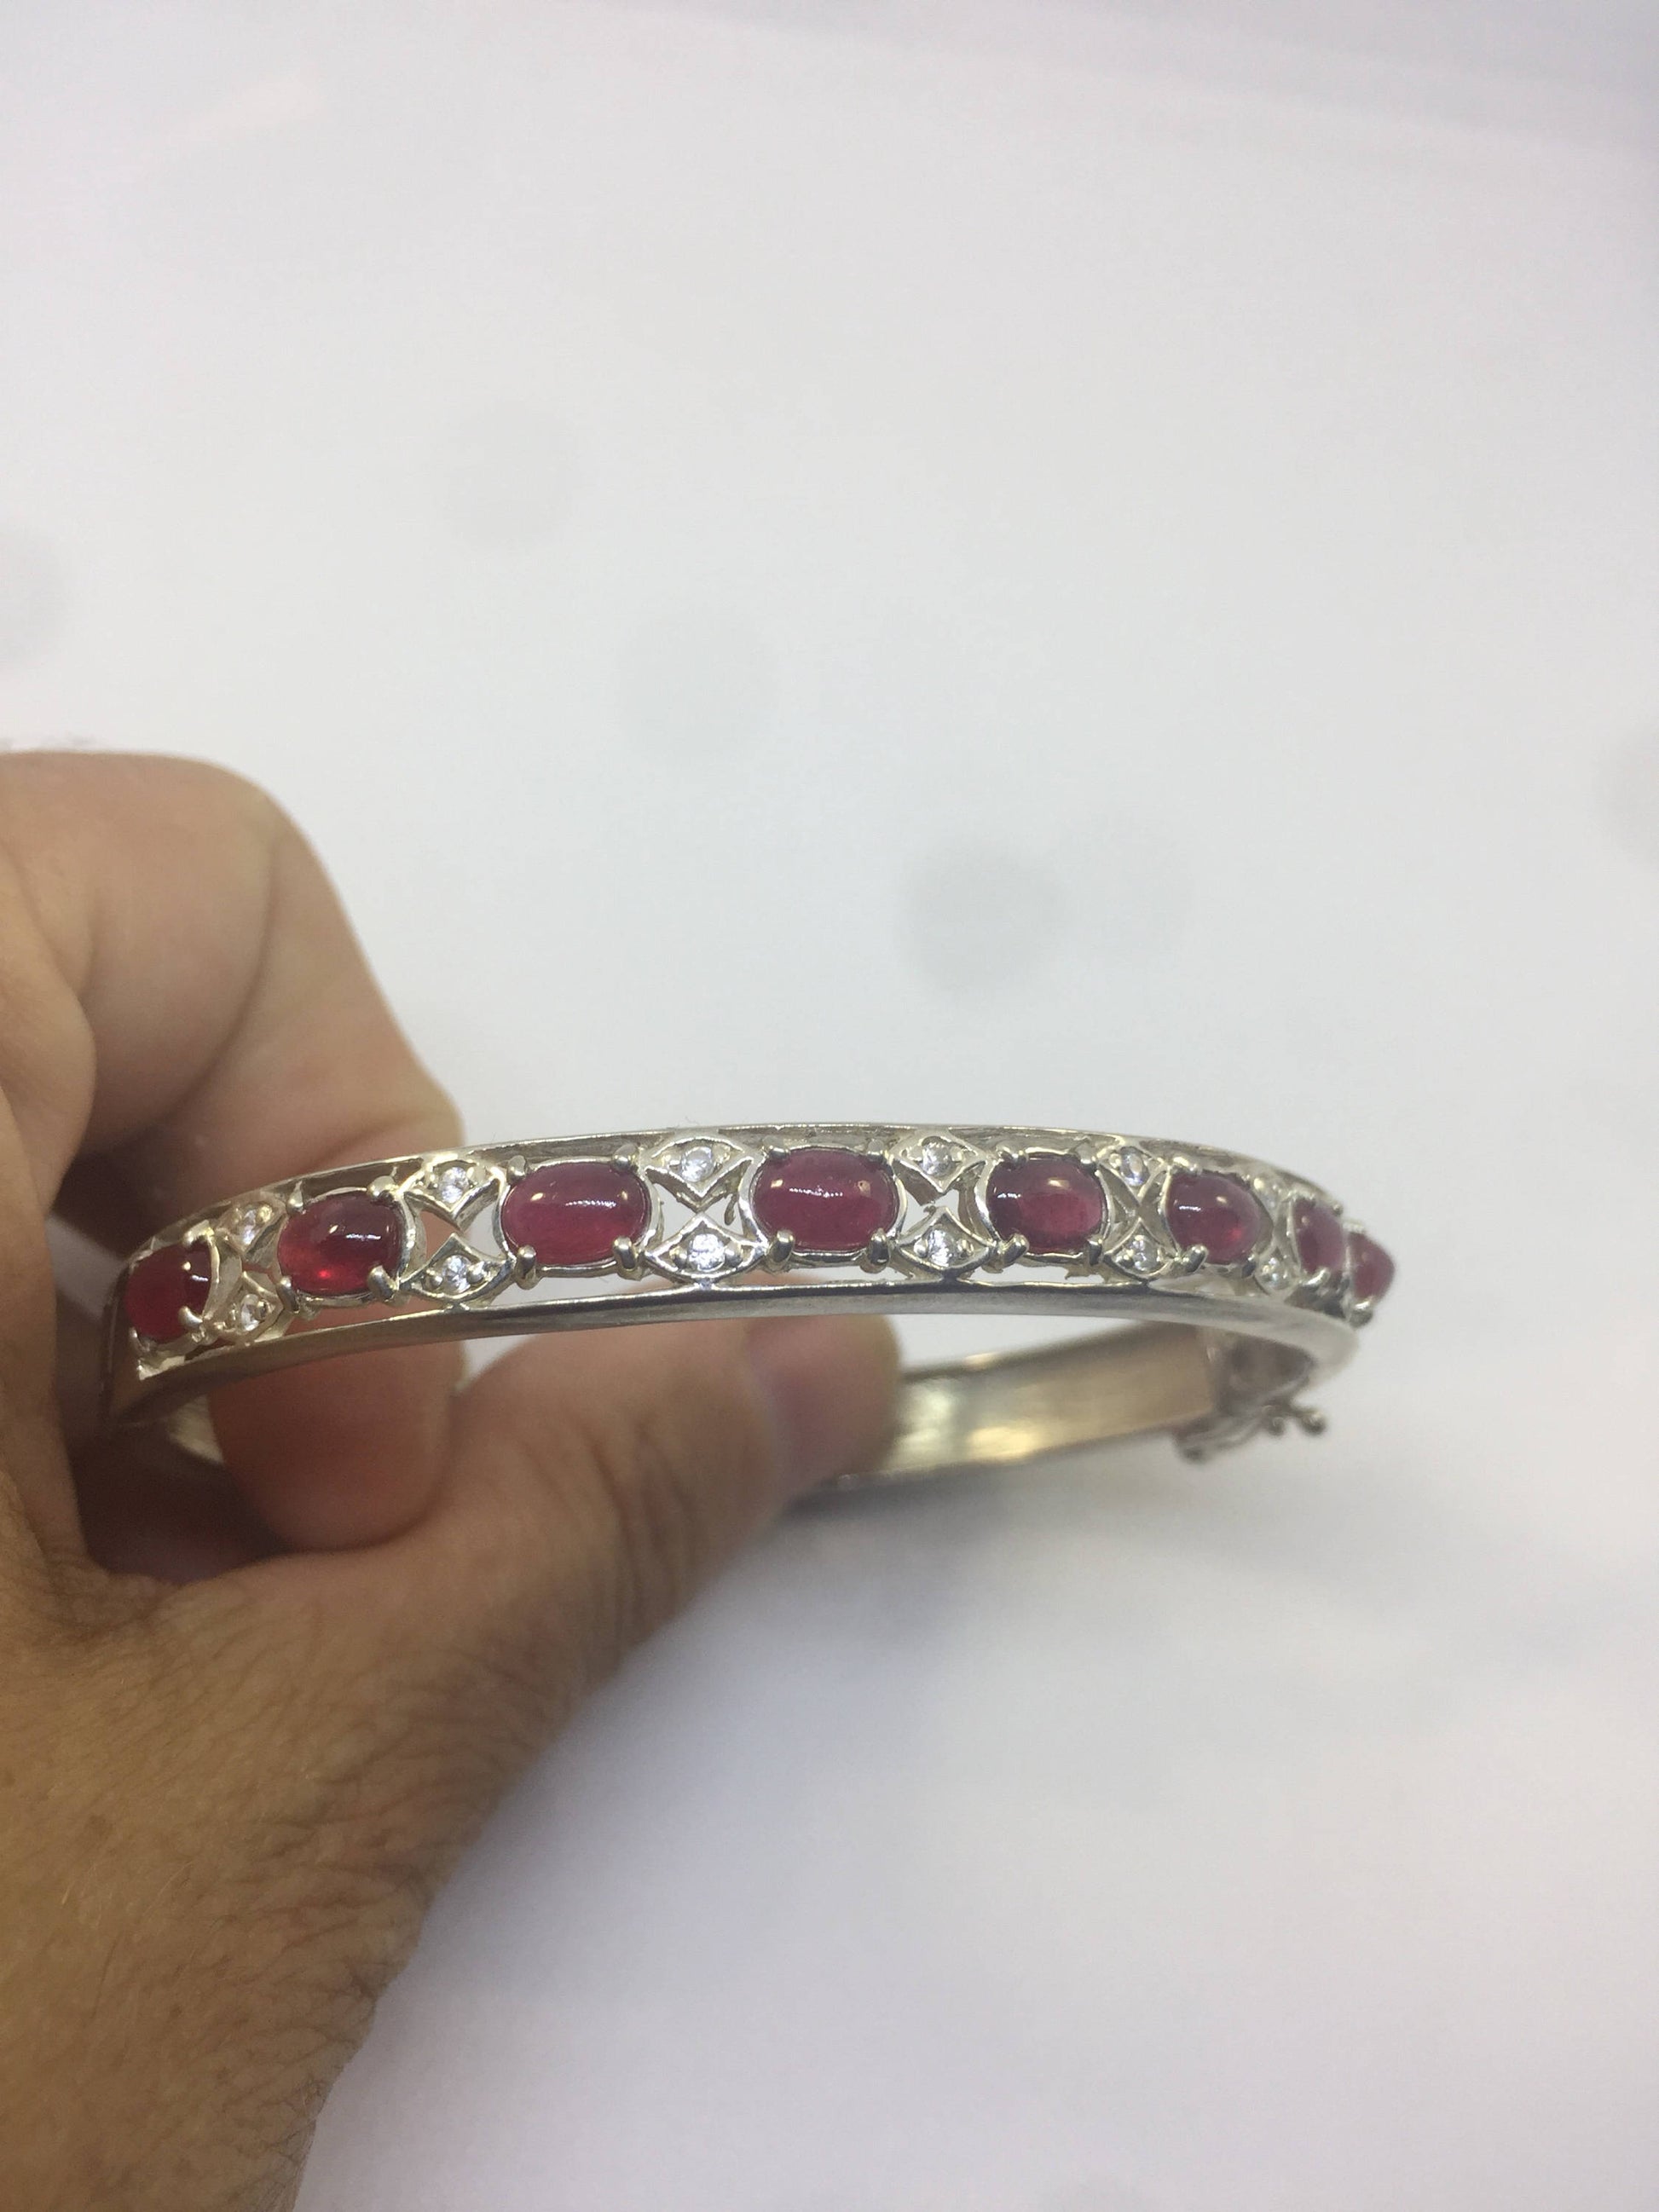 Handmade Genuine White Sapphire and Ruby in 925 Sterling Silver Bangle Bracelet